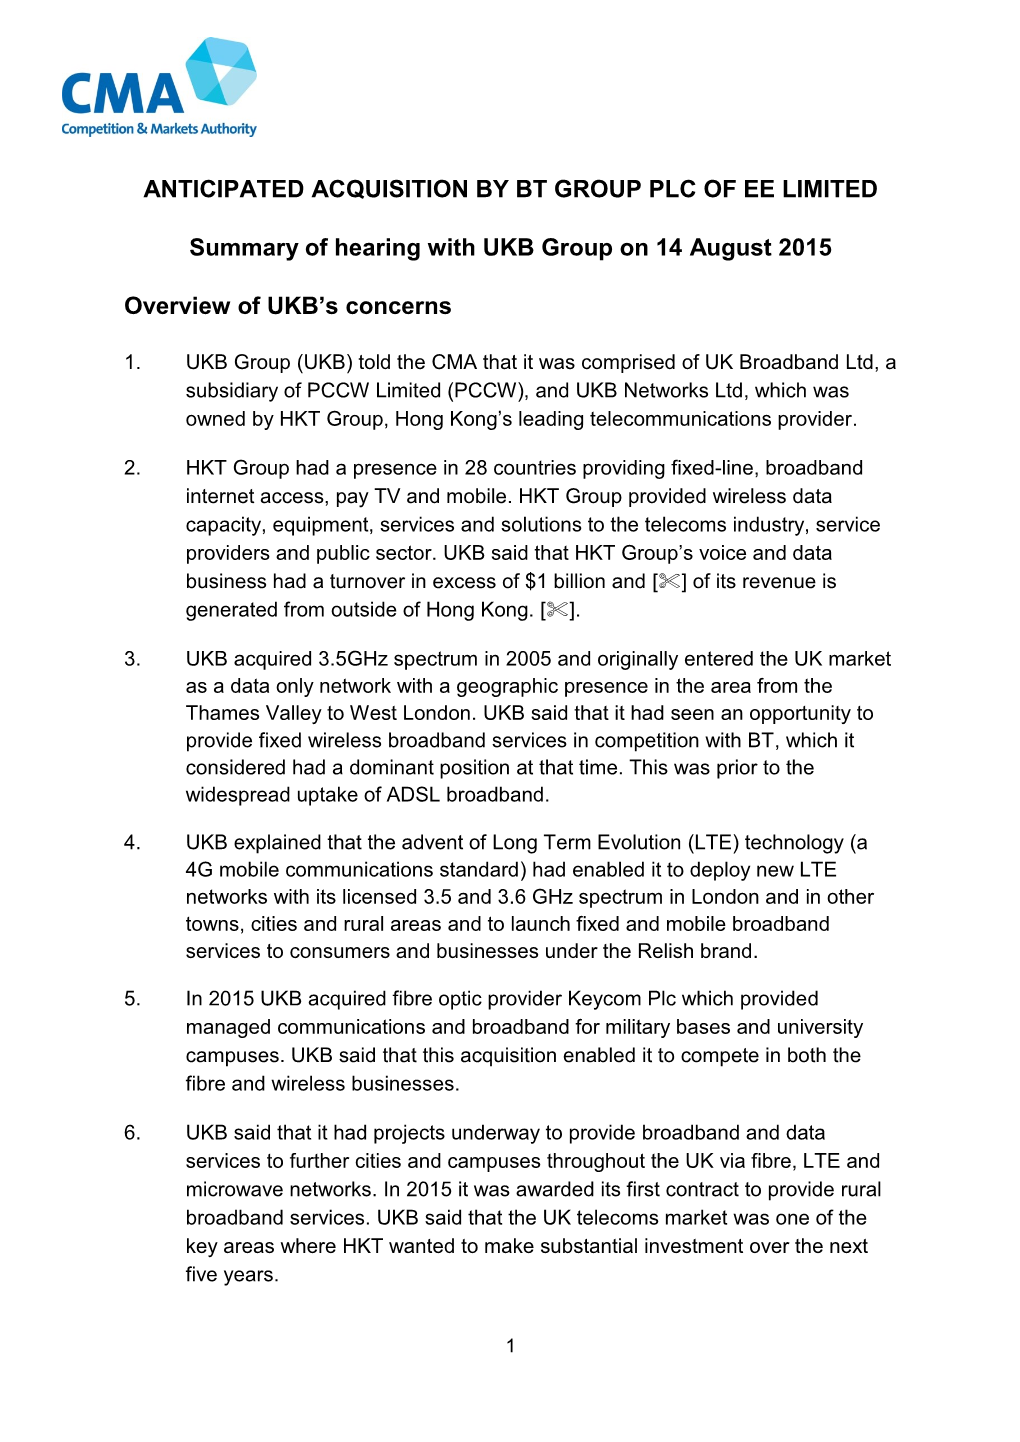 ANTICIPATED ACQUISITION by BT GROUP PLC of EE LIMITED Summary of Hearing with UKB Group on 14 August 2015 Overview of UKB's Concerns